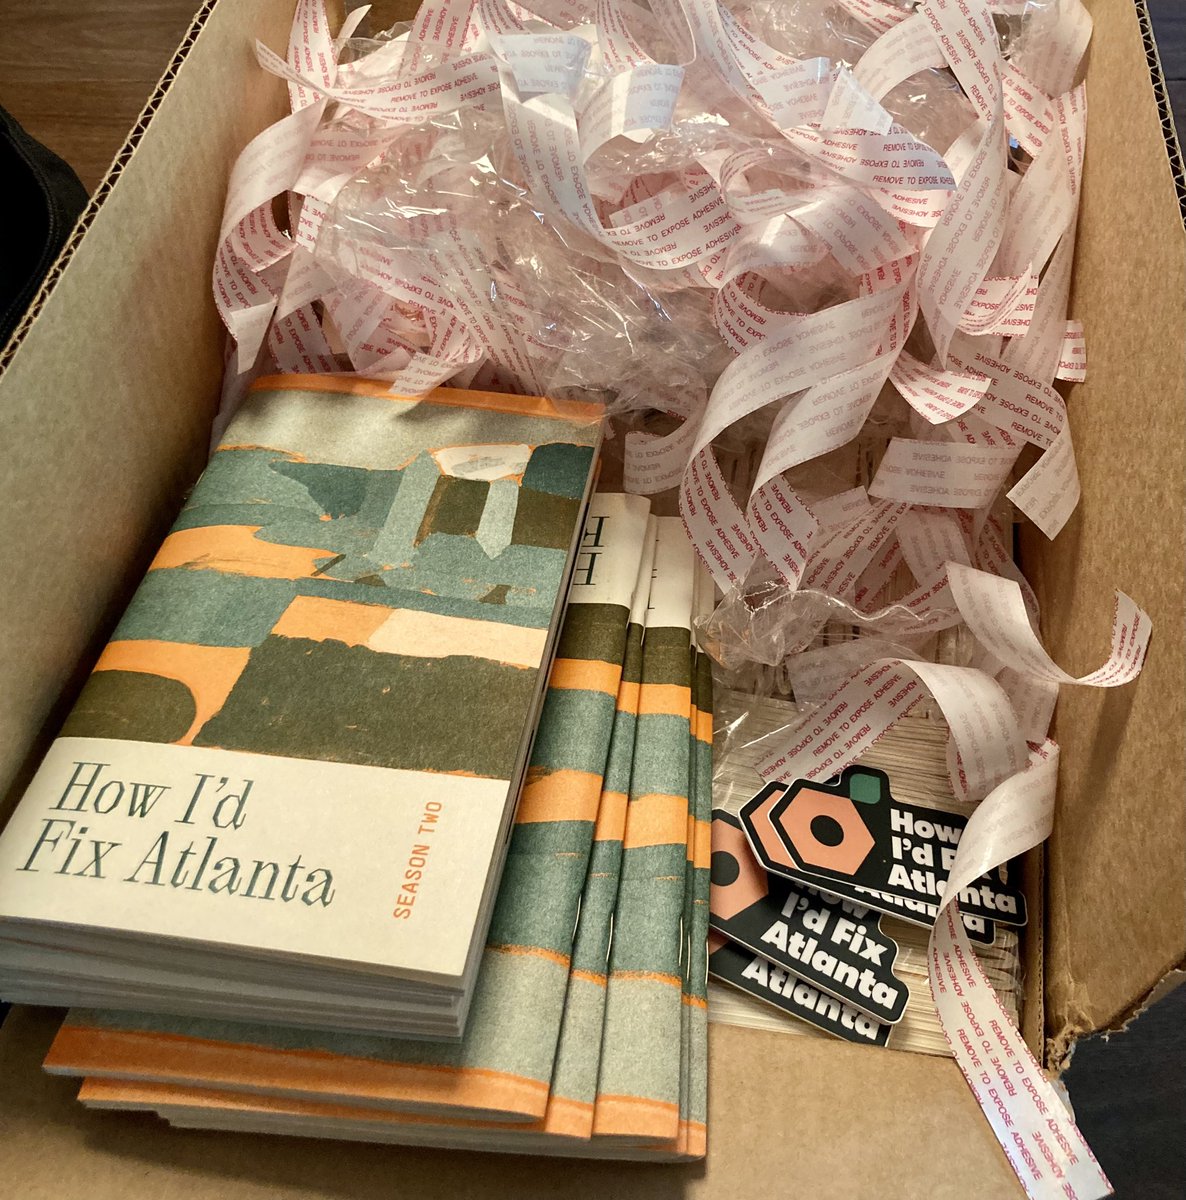 We’ve sold 134 copies of How I’d Fix Atlanta’s Season Two zine so far. But there are 6,307,261 people living in the ATL metro—we can do better. It’s got 14,295 words and 10 illustrations across 60 pages. Wow. Want one? Venmo [@]austinlouisray $25 and include your snail mail.